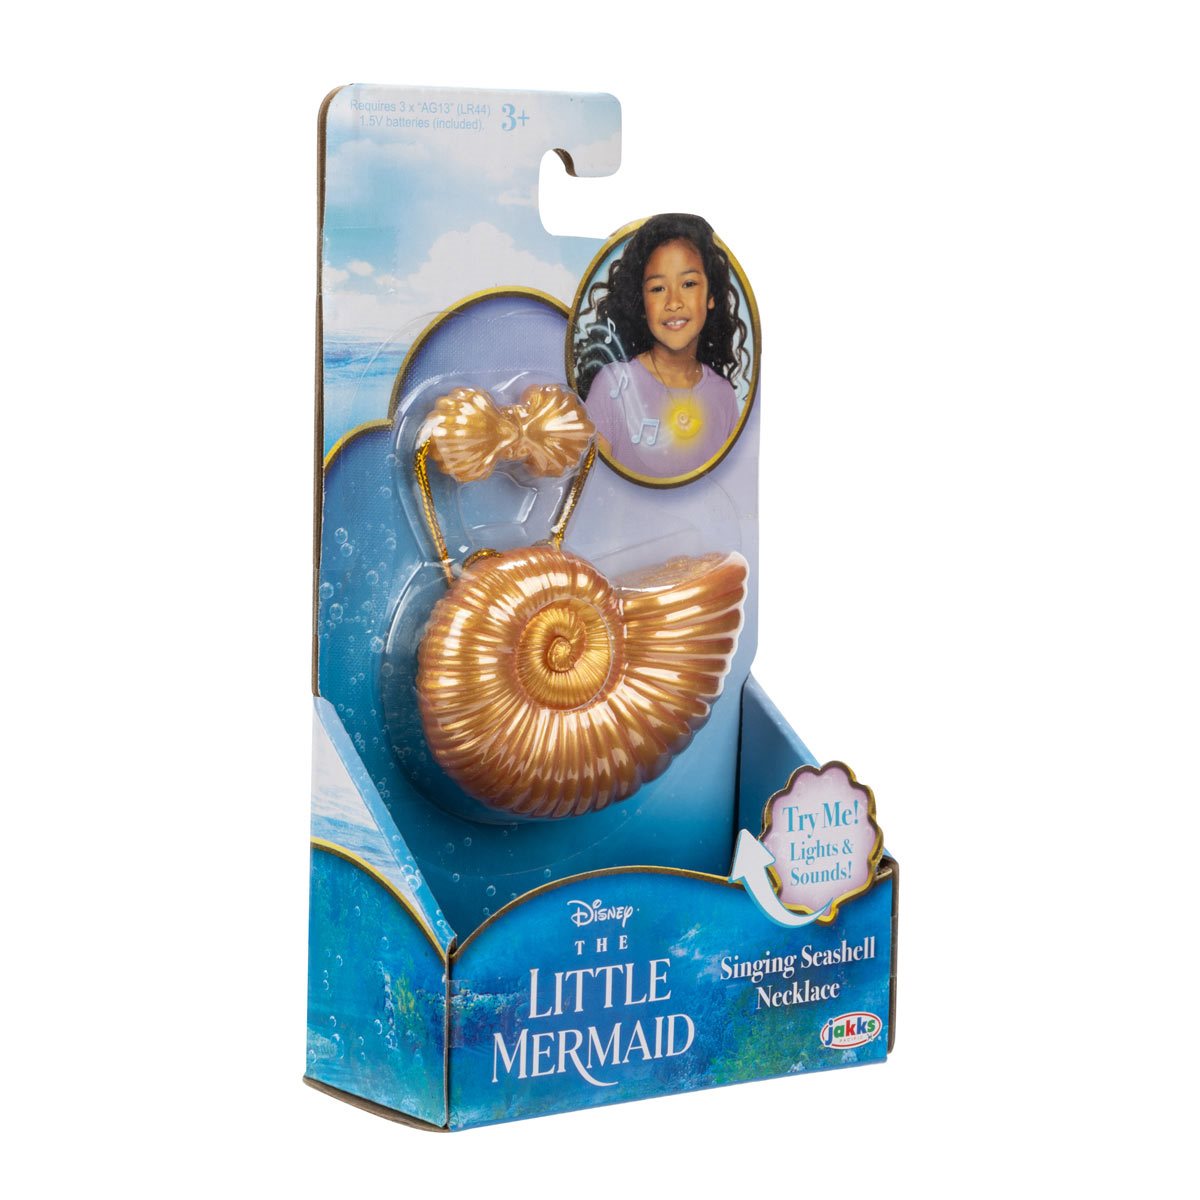 The Little Mermaid Singing Seashell Necklace